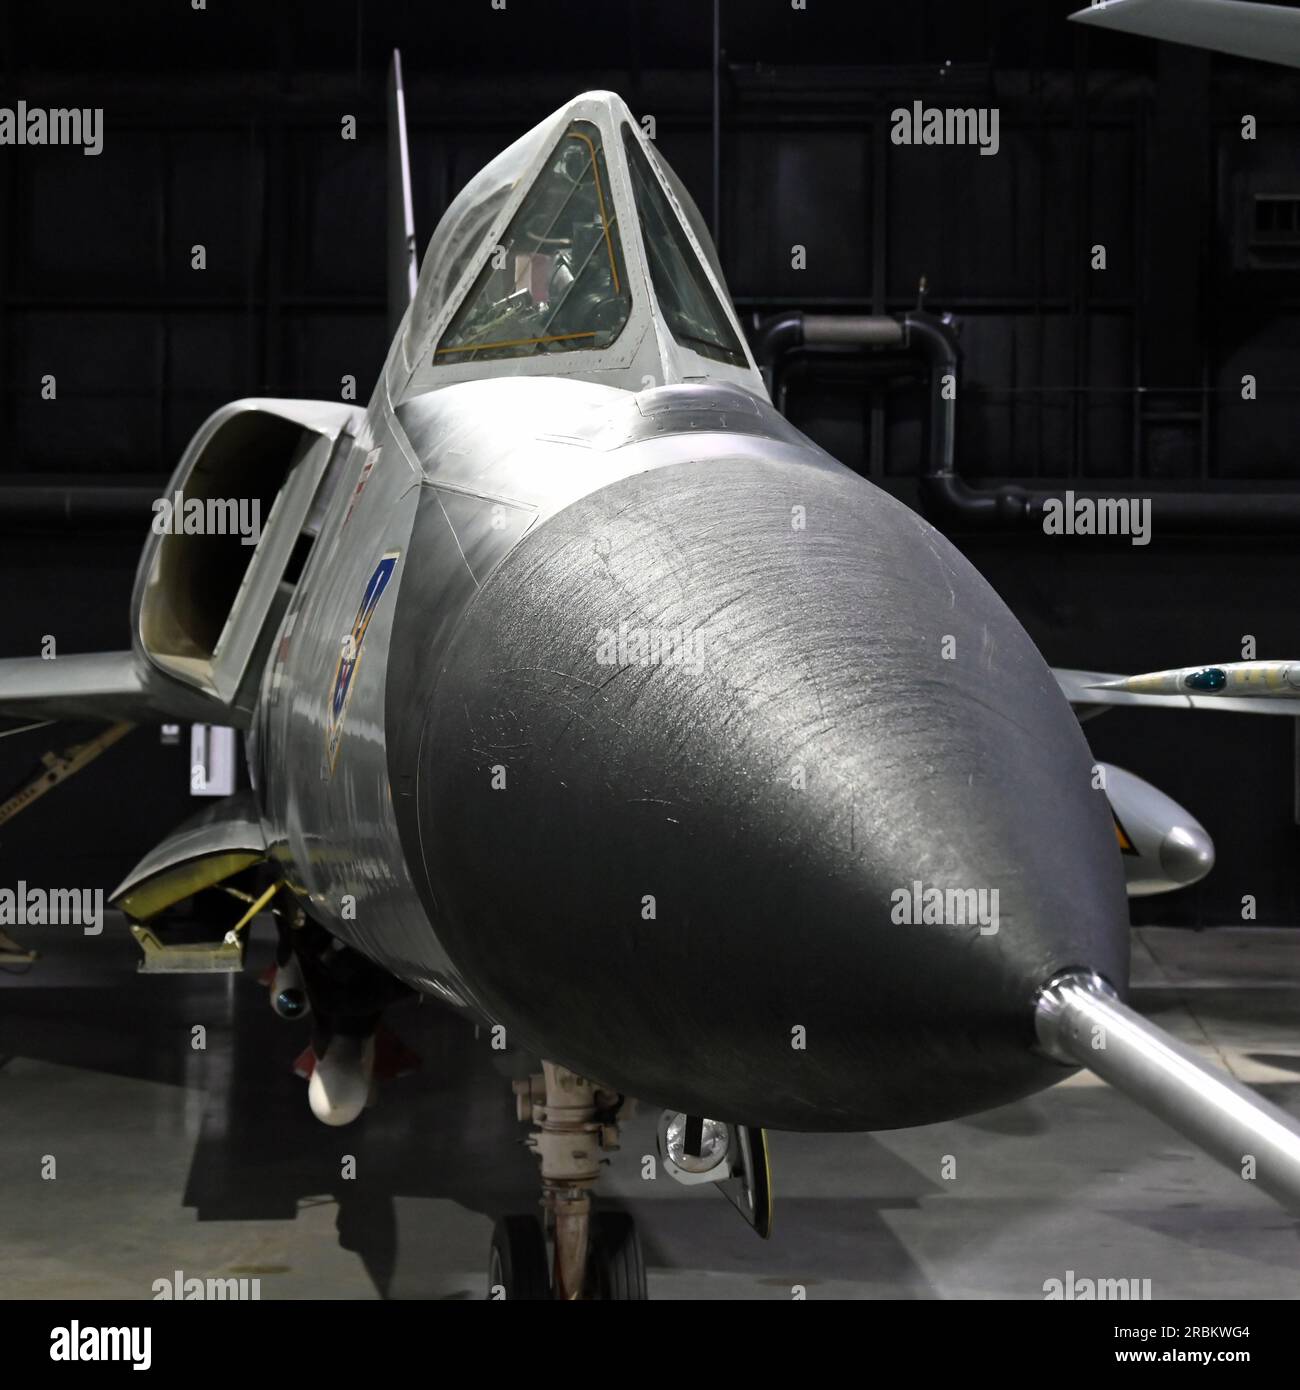 Nose section of a USAF Convair F-106A interceptor aircraft on display at the US Air Force National Museum in Dayton, Ohio. Stock Photo